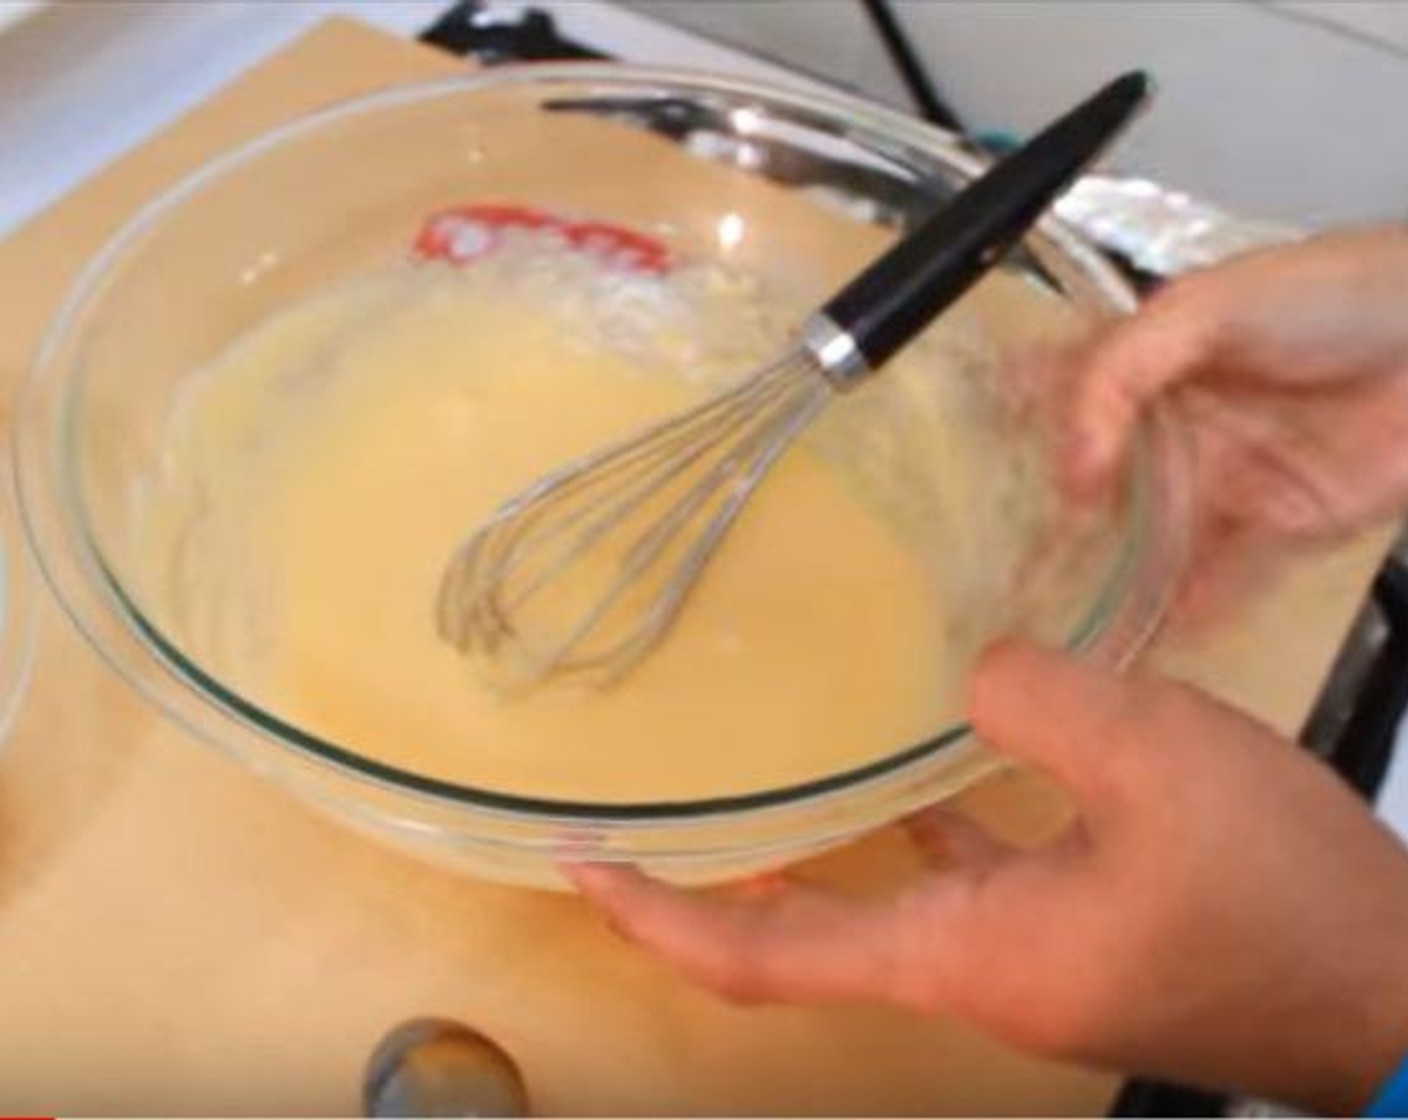 step 2 Mix the All-Purpose Flour (1 1/2 cups), Baking Powder (1 1/2 cups), Corn Starch (1 Tbsp), and Salt (1/4 tsp). Add them to the wet mixture. Whisk until incorporated.